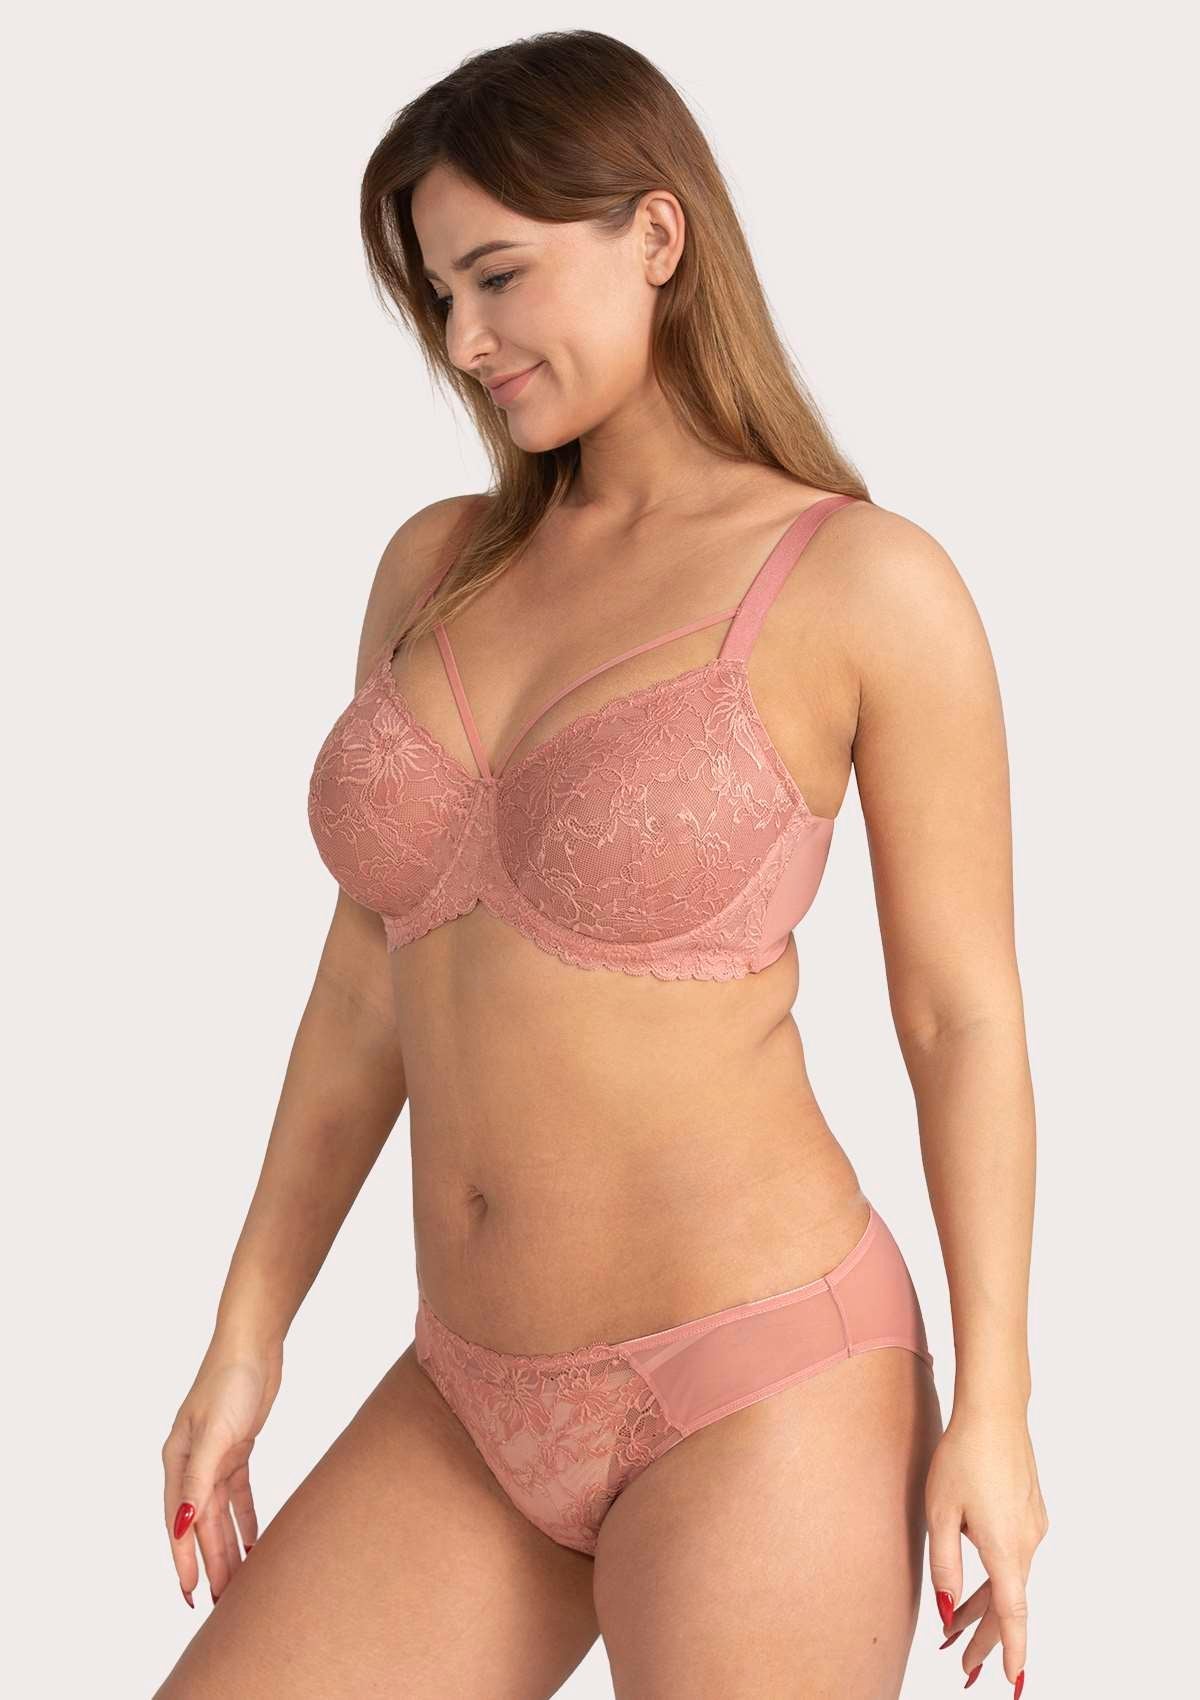 HSIA Pretty In Petals Lace Bra And Panty Sets: Bra For Big Boobs - Light Coral / 34 / C